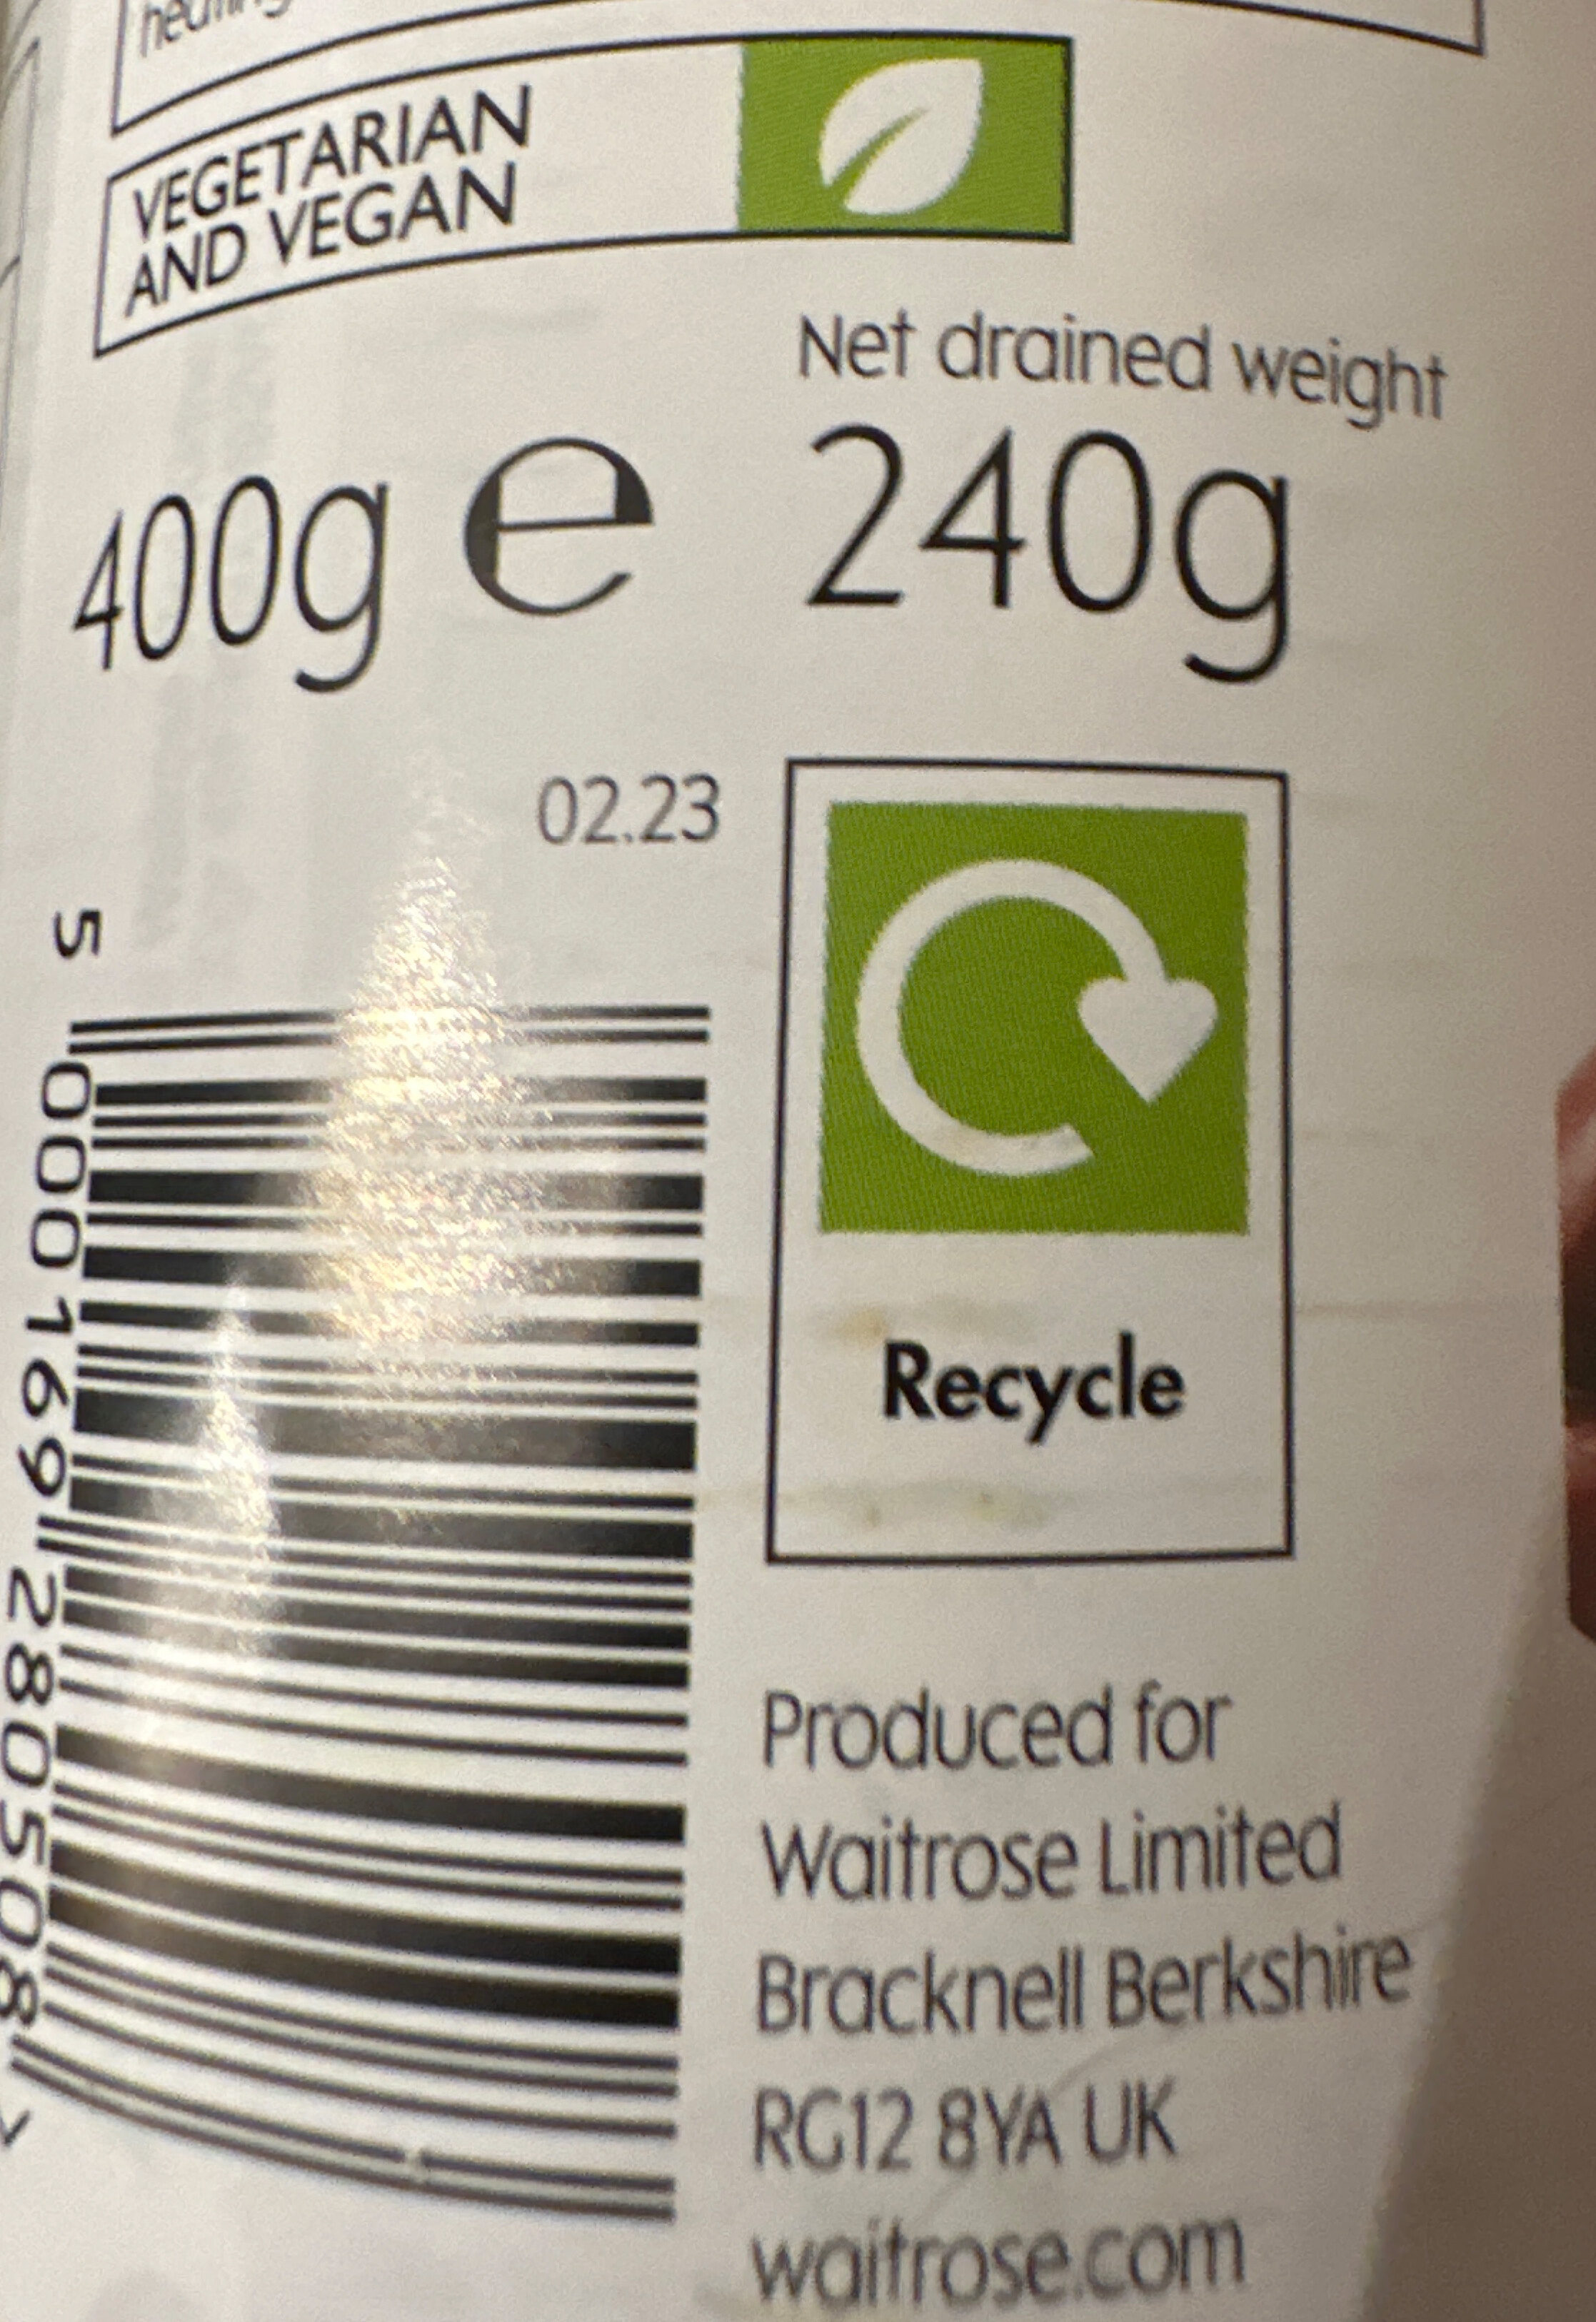 Red kidney beans in water - Recycling instructions and/or packaging information